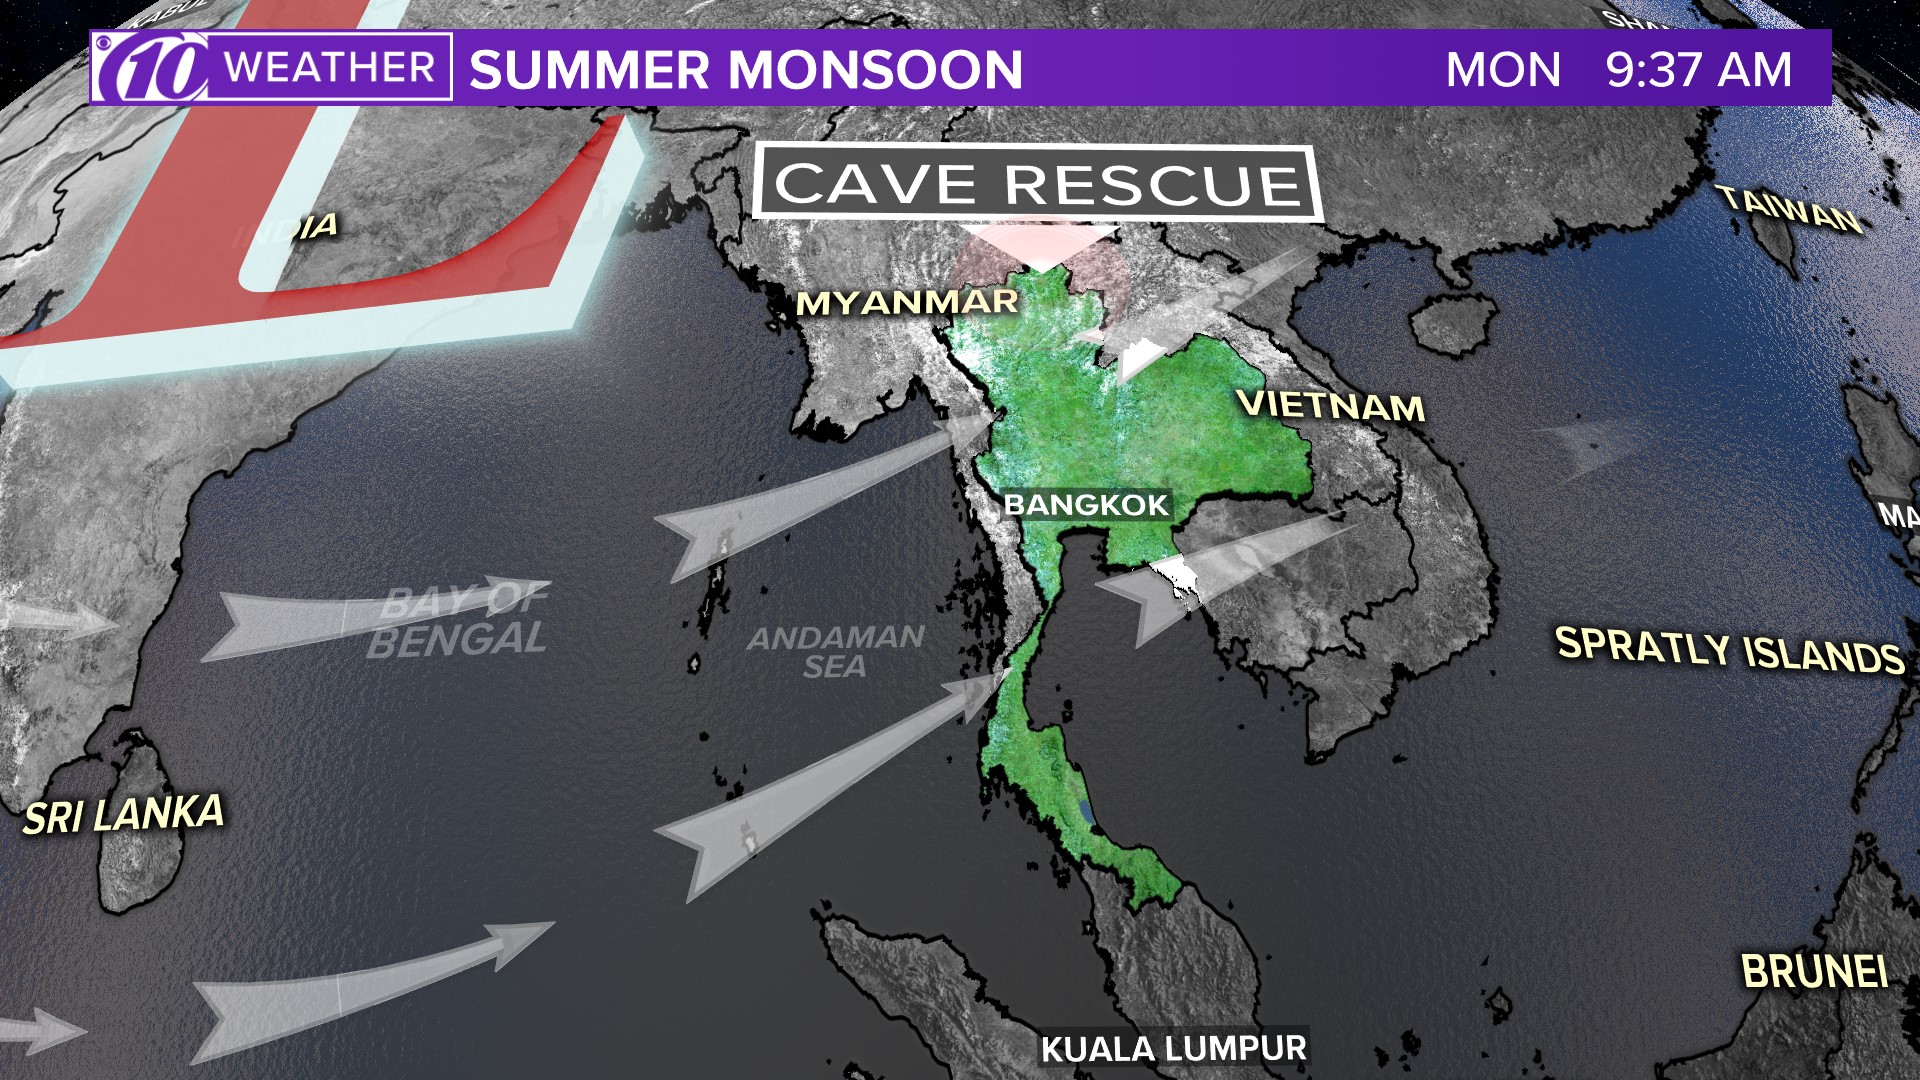 Thailand Cave Rescue Why monsoon season is a race against time